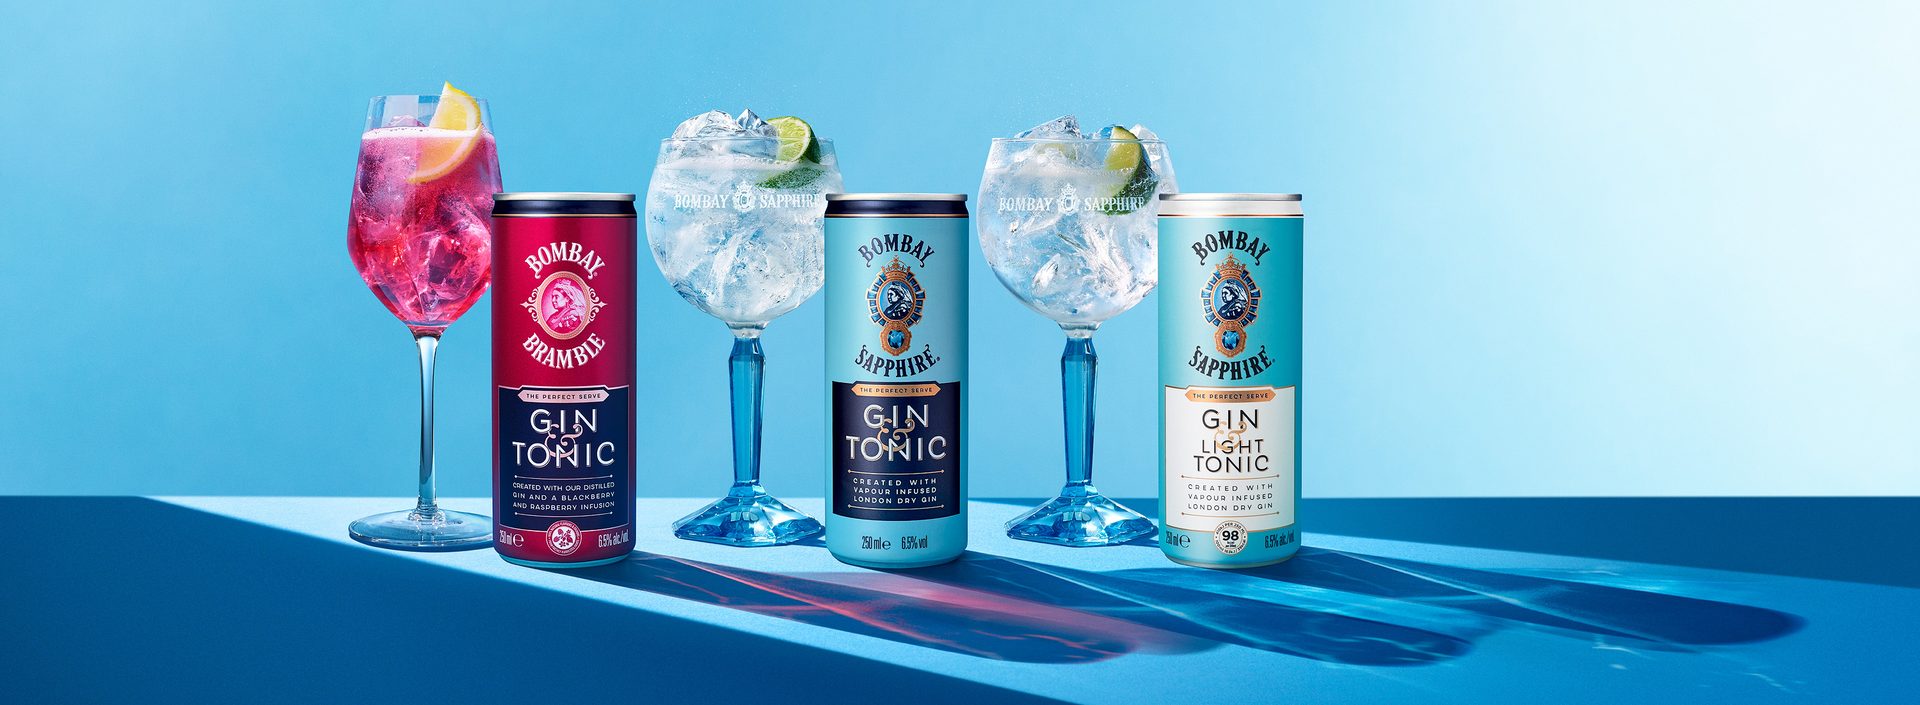 Bombay Sapphire cans